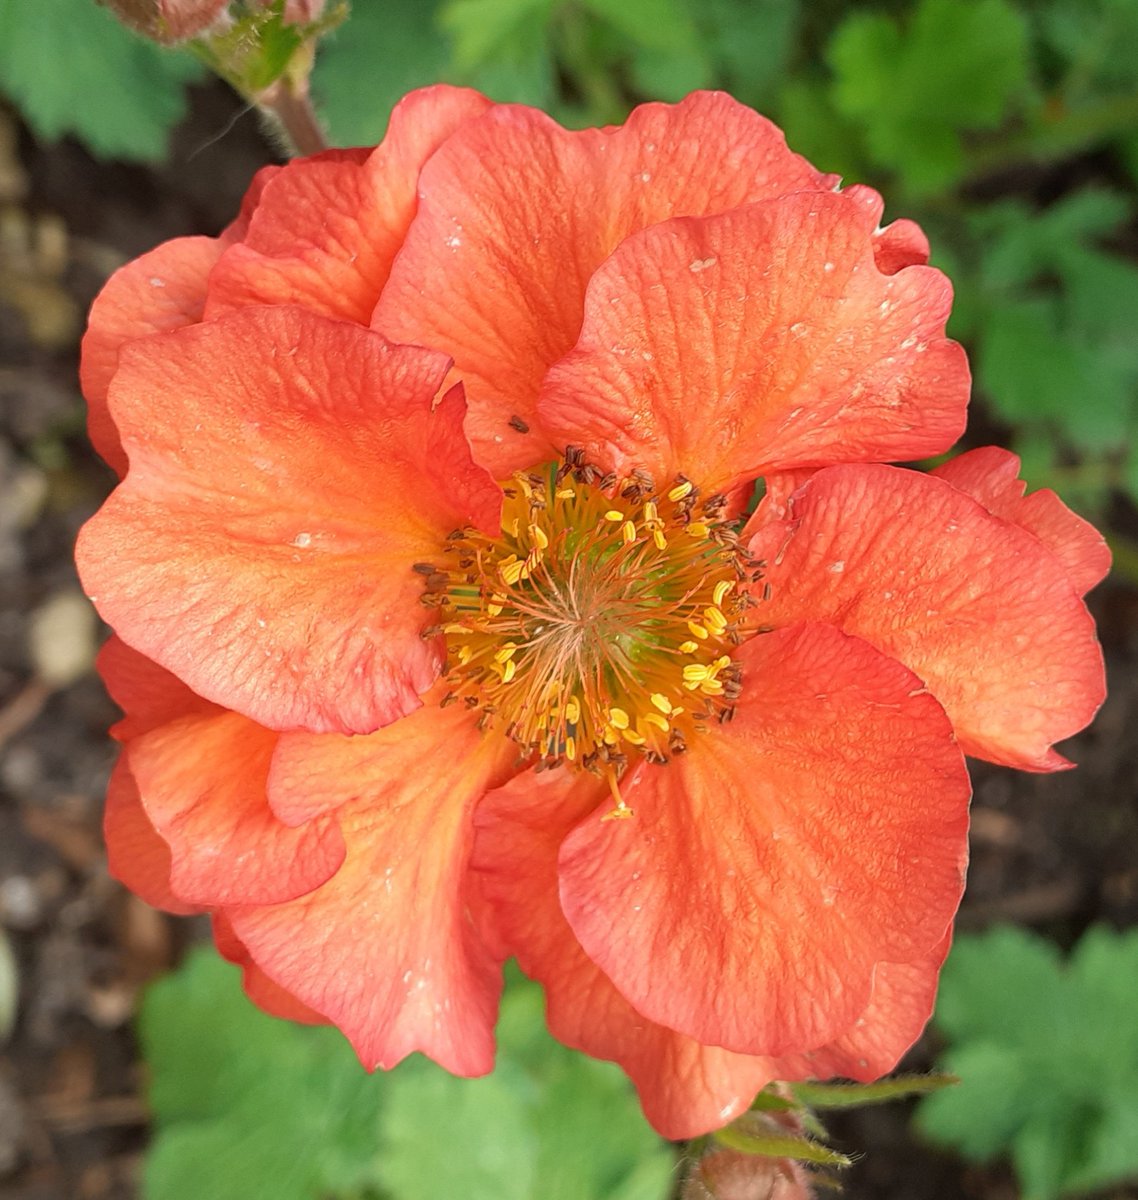 Good morning Twitter World. The Geums are just so lovely and bright and flower for months. This is Totally Tangerine. What's your favourite flower at the moment? #goodmorning #gardening #flowers